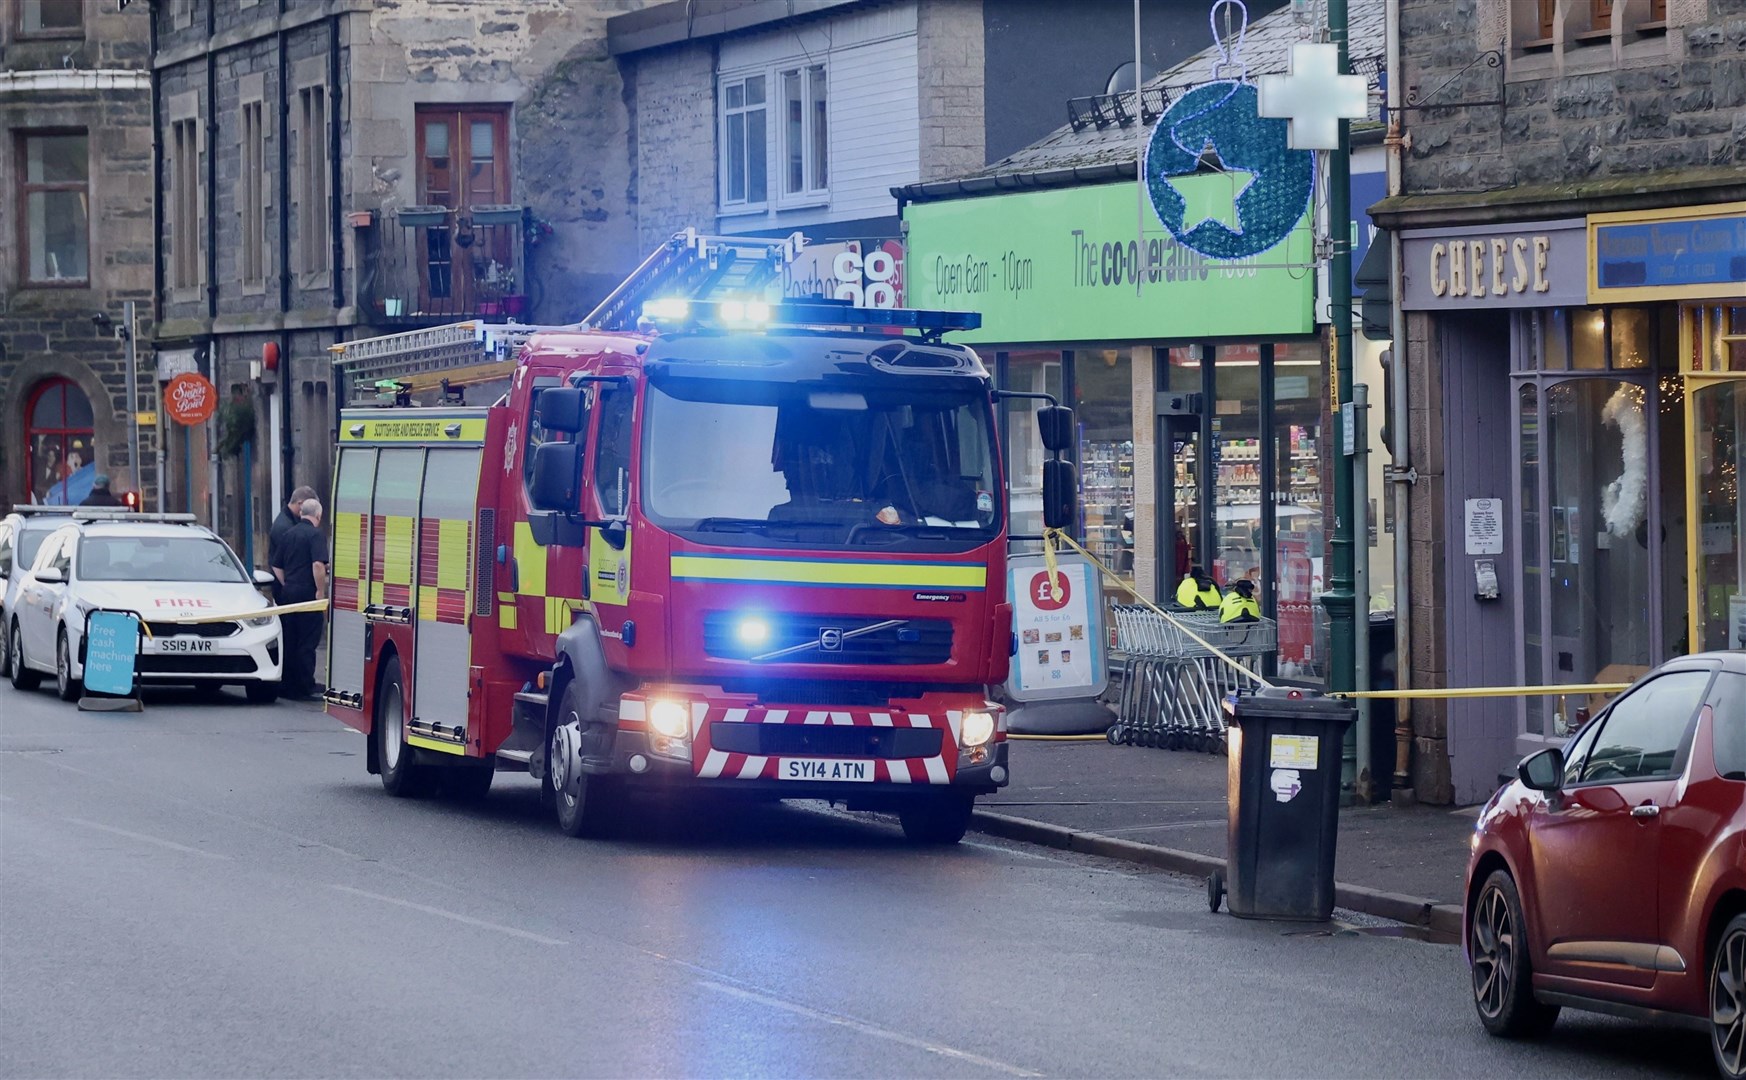 Kingussie Fire Service were quickly on the scene after the alarm went up this morning